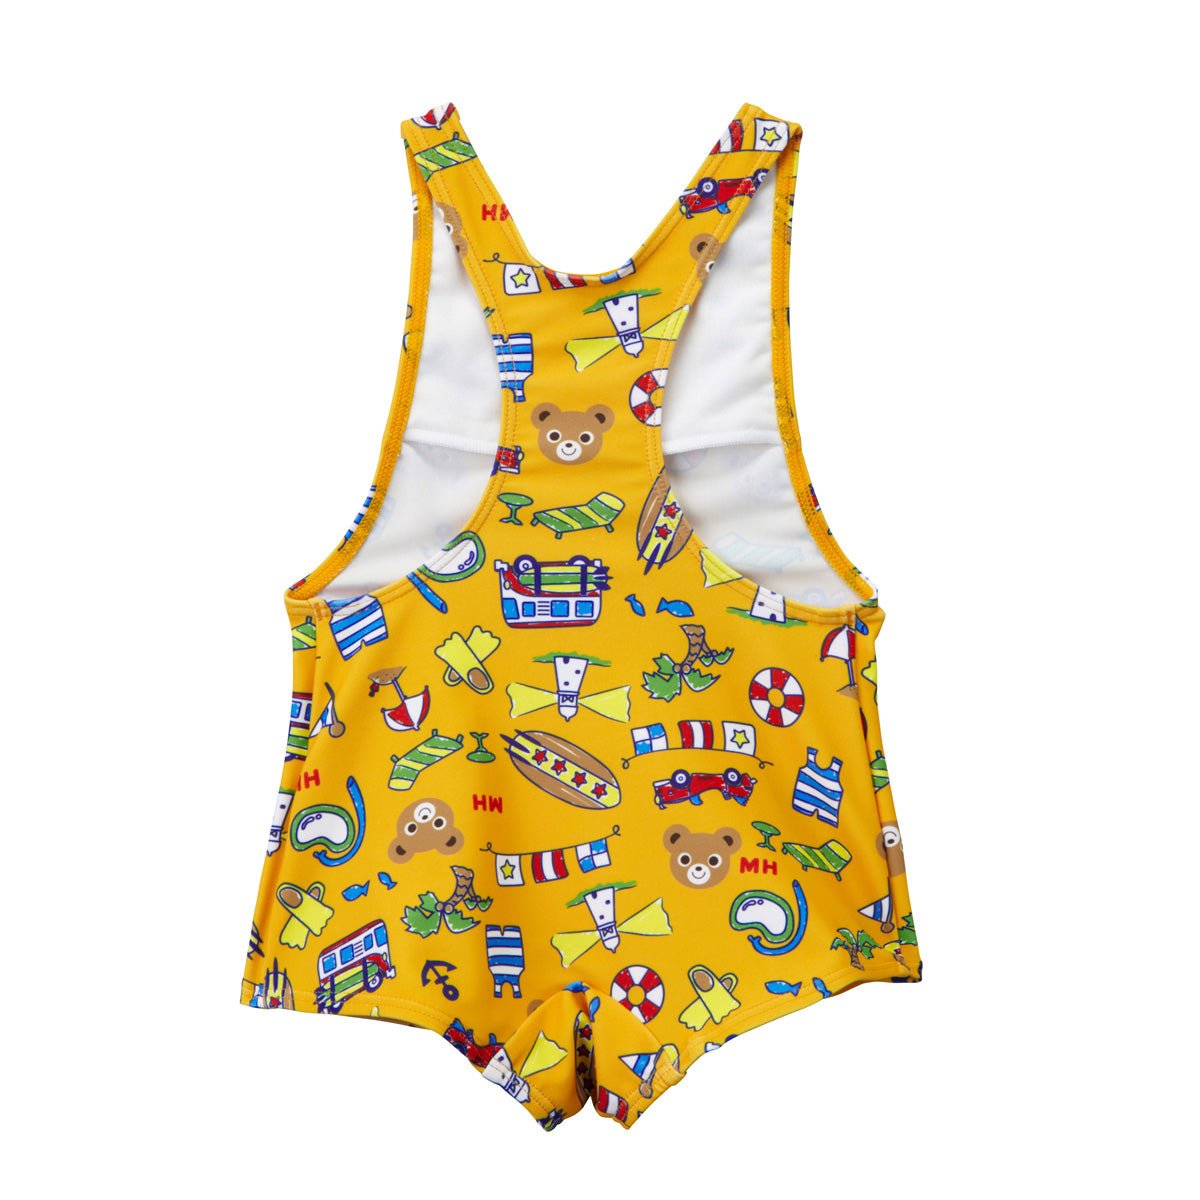 Boy’s One-piece Swimsuit (UV Protection) - 12-7101-617-04-80